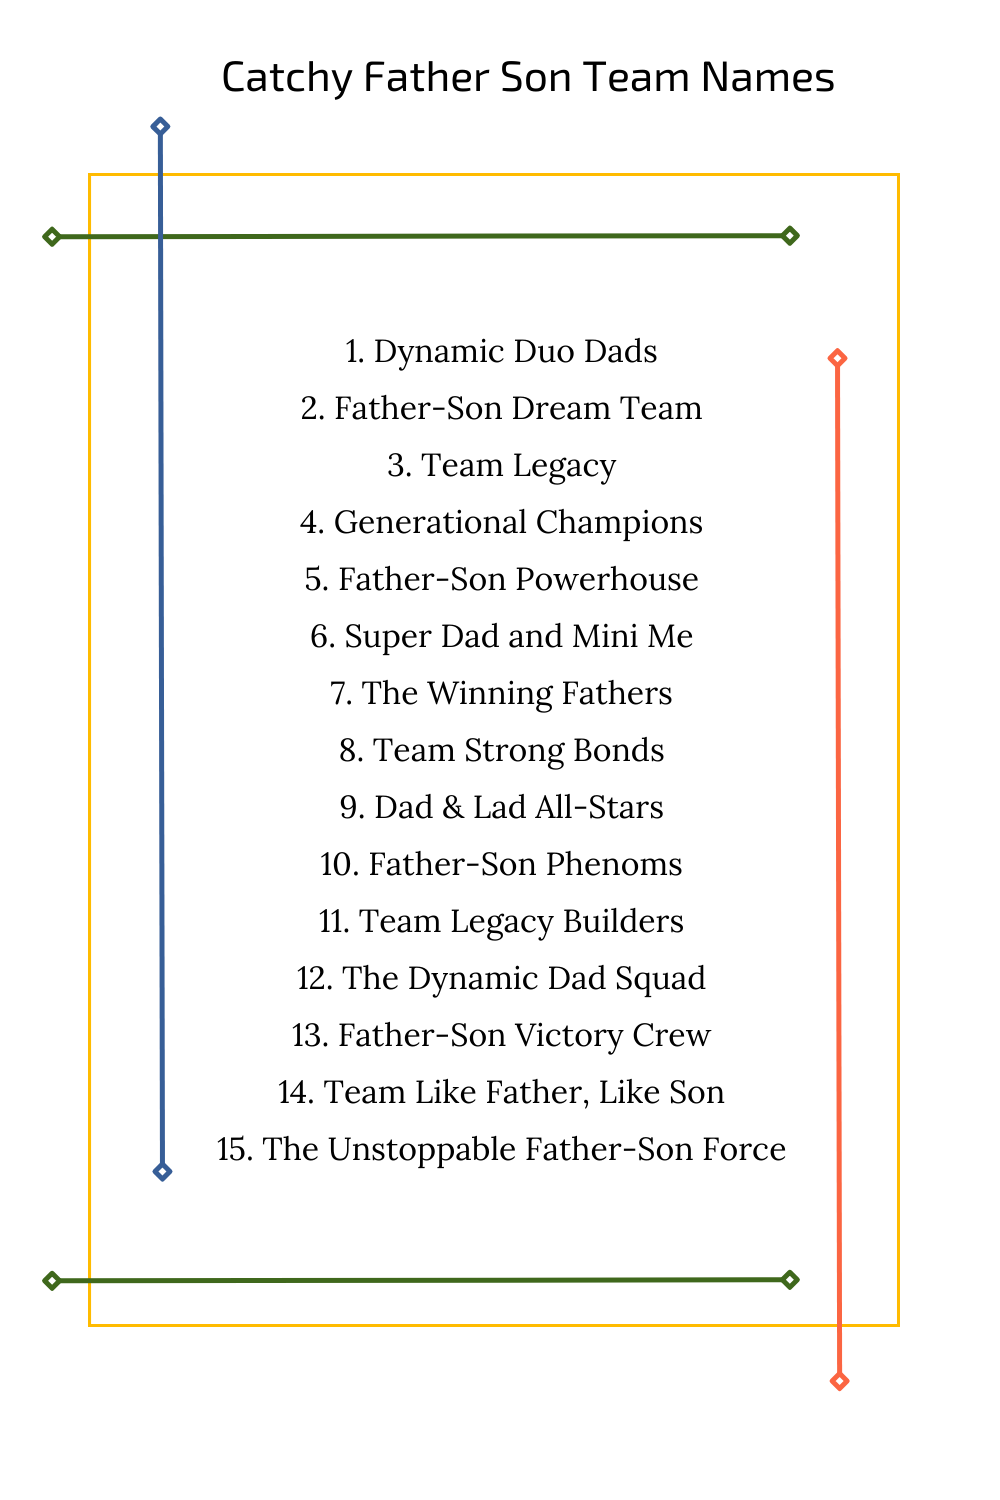 Catchy Father Son Team Names